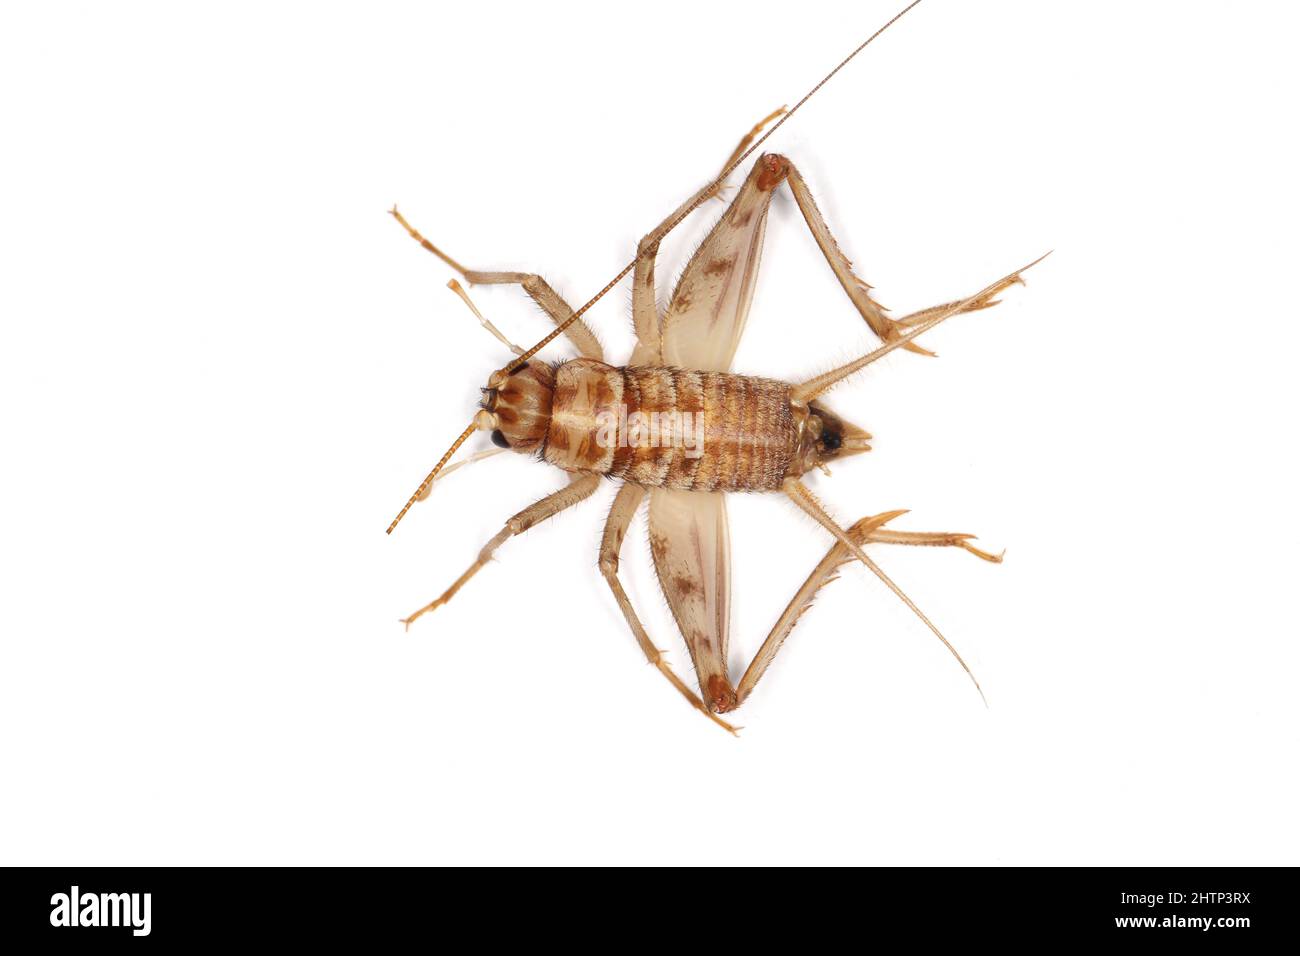 Cuban cricket, Gryllus assimilis, a species of breeding, food insect. Food for reptiles, amphibians, spiders. Stock Photo